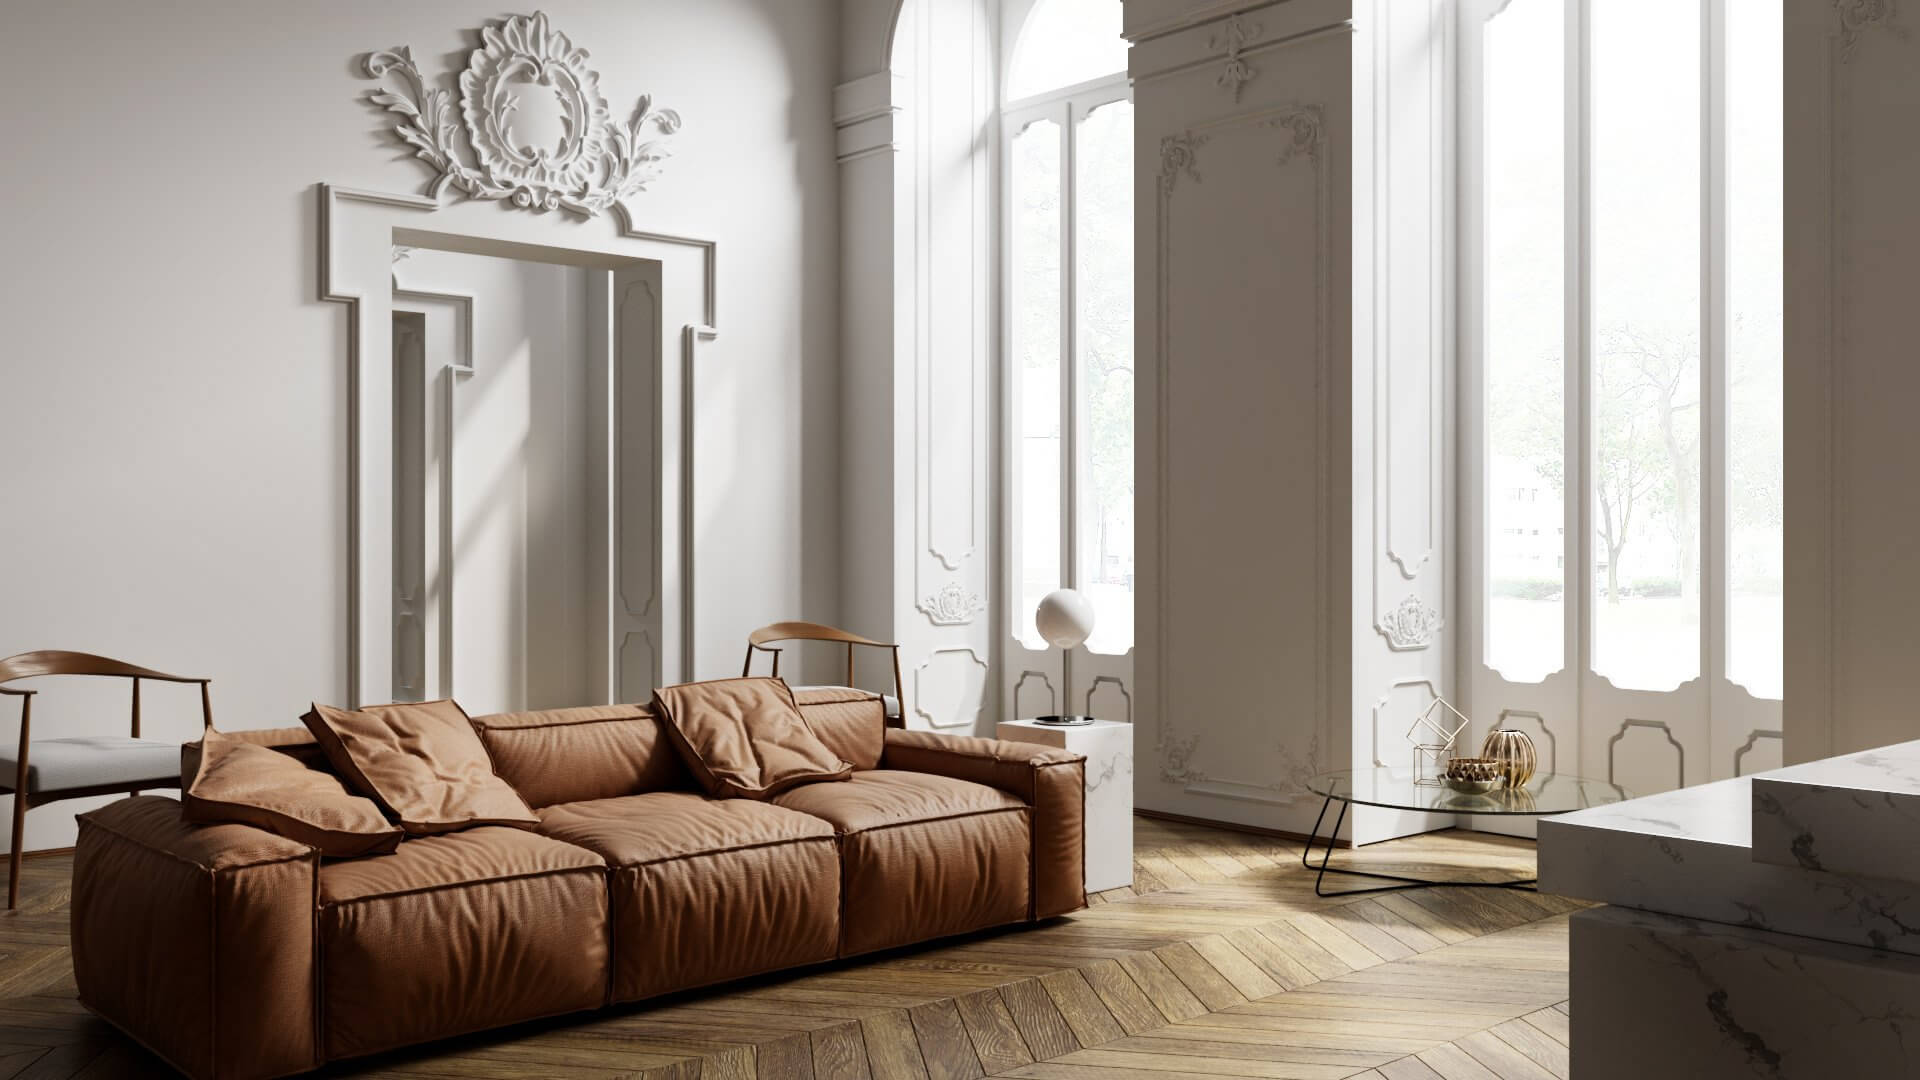 Stylish and classic living room couch - cgi visualization